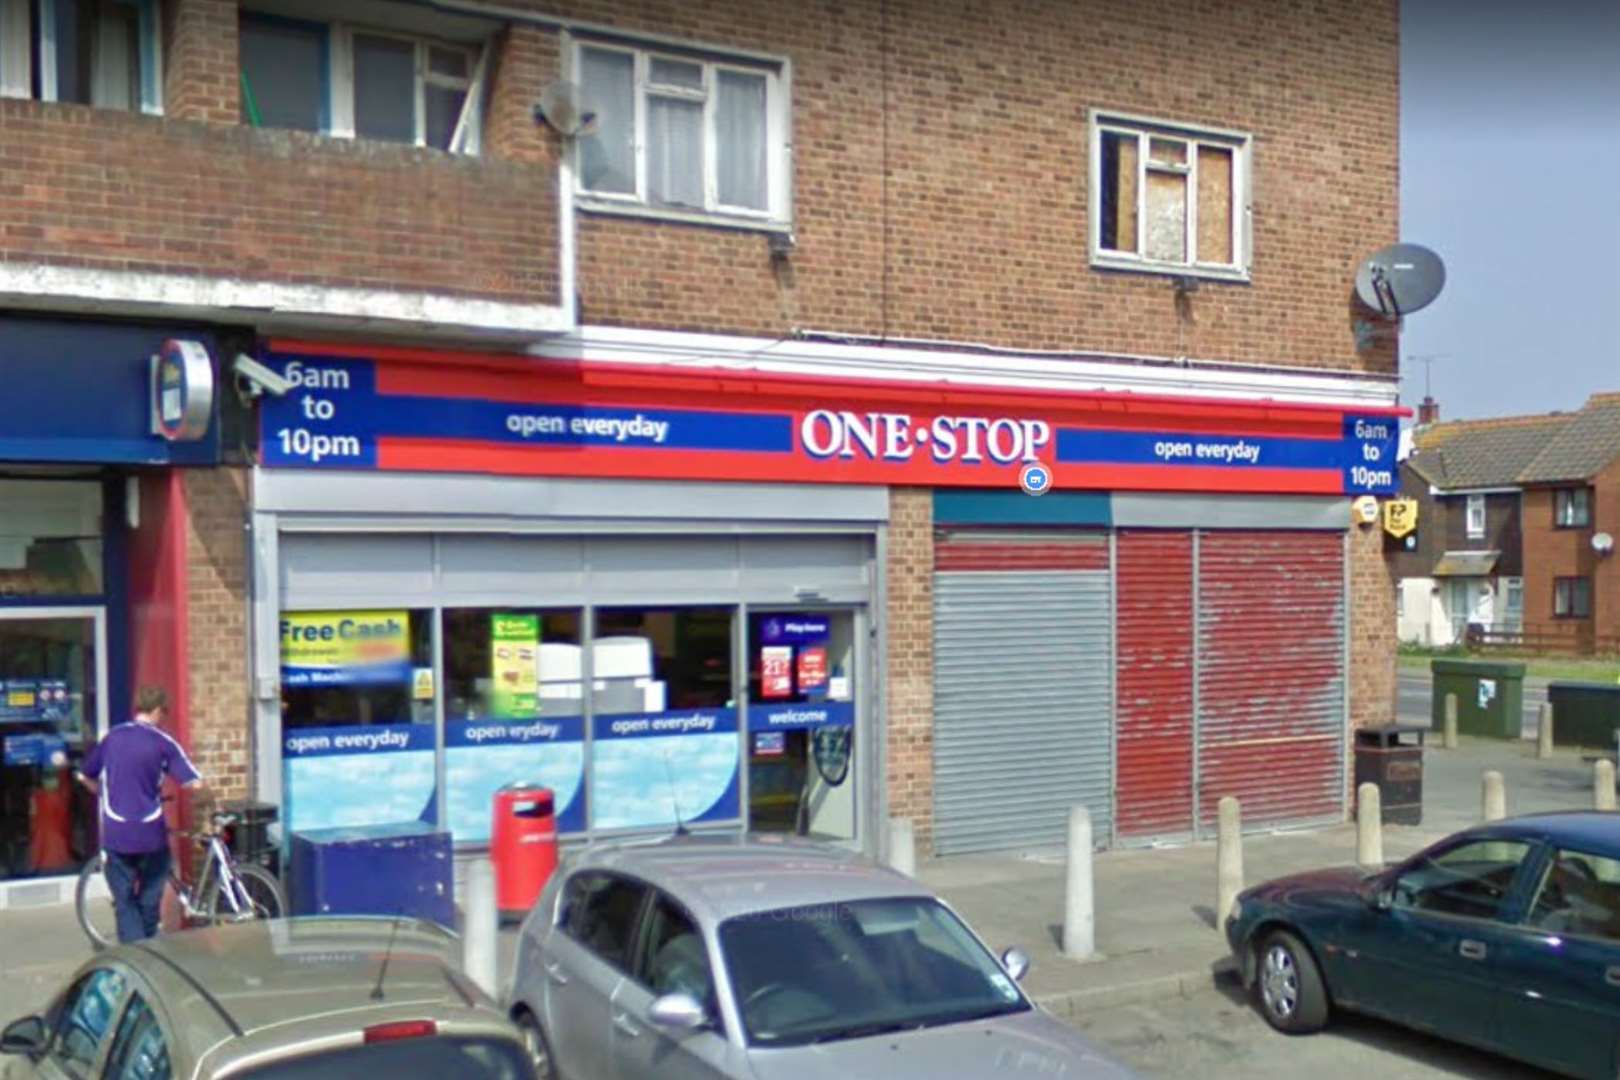 Alcohol and other items were stolen from the One Stop store. Picture: Google